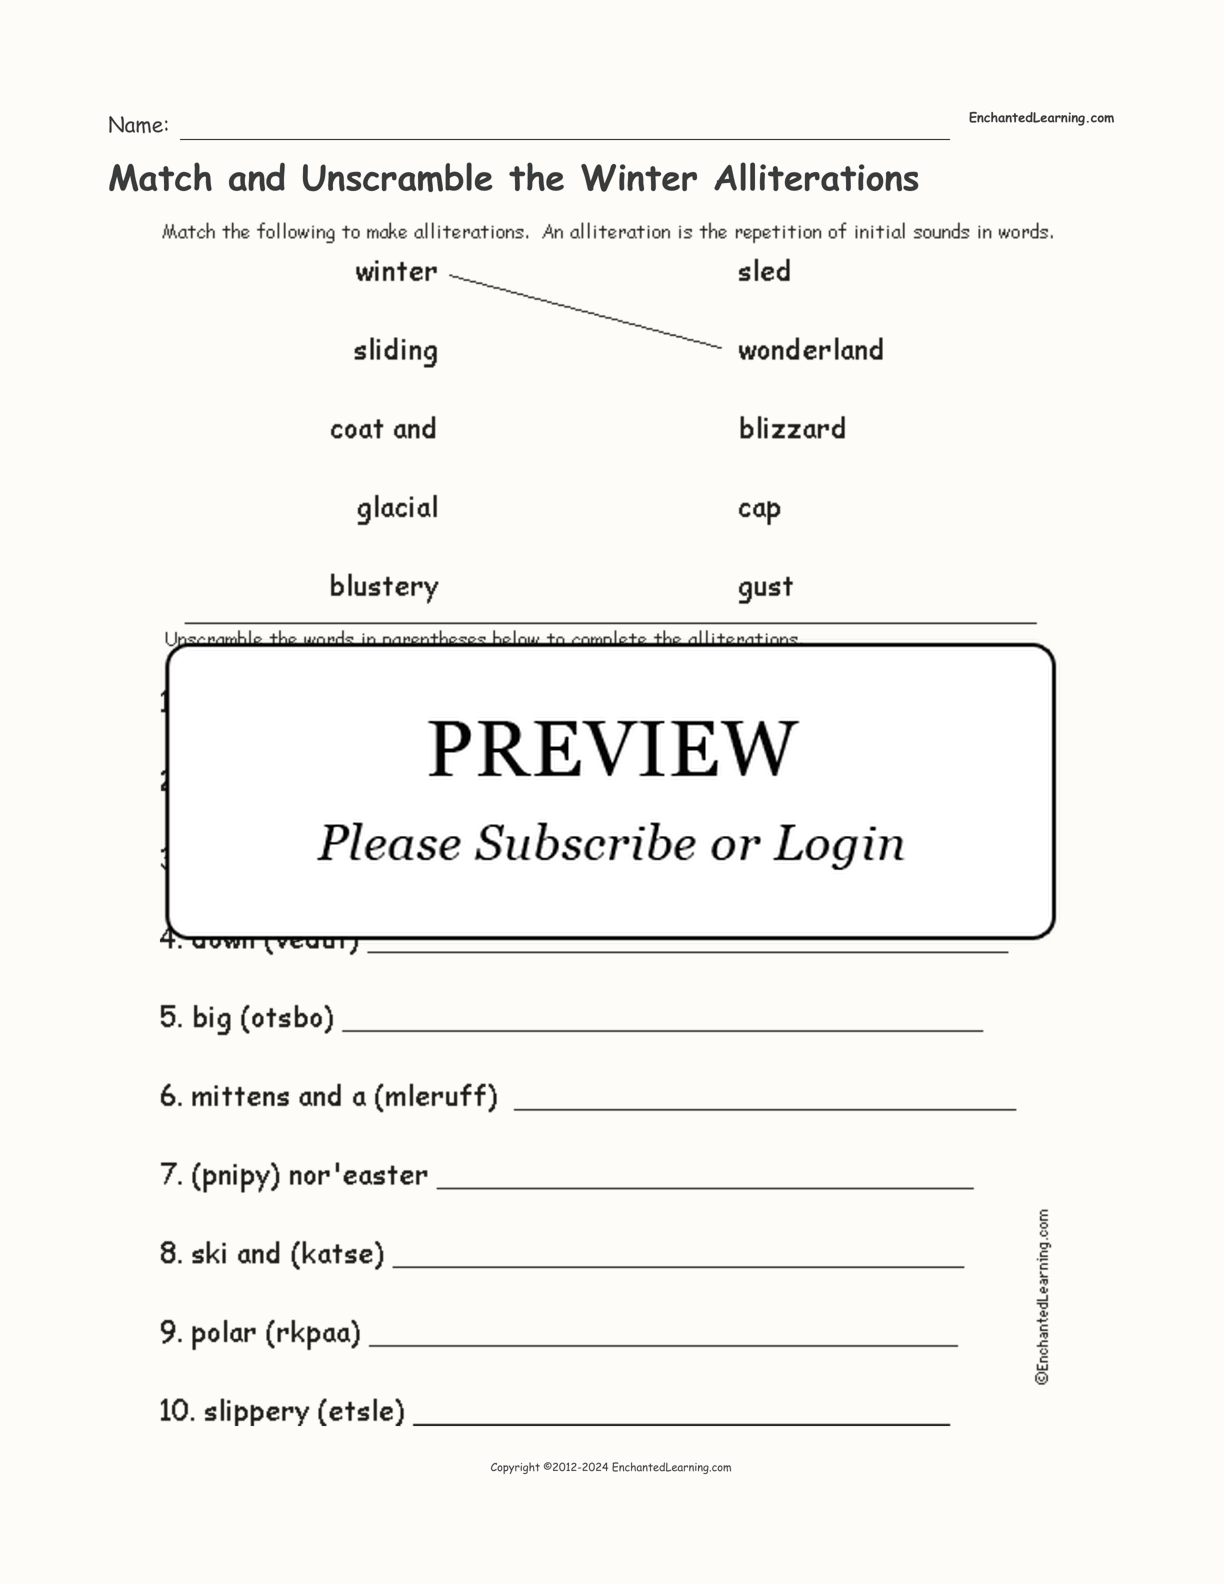 Match and Unscramble the Winter Alliterations interactive worksheet page 1